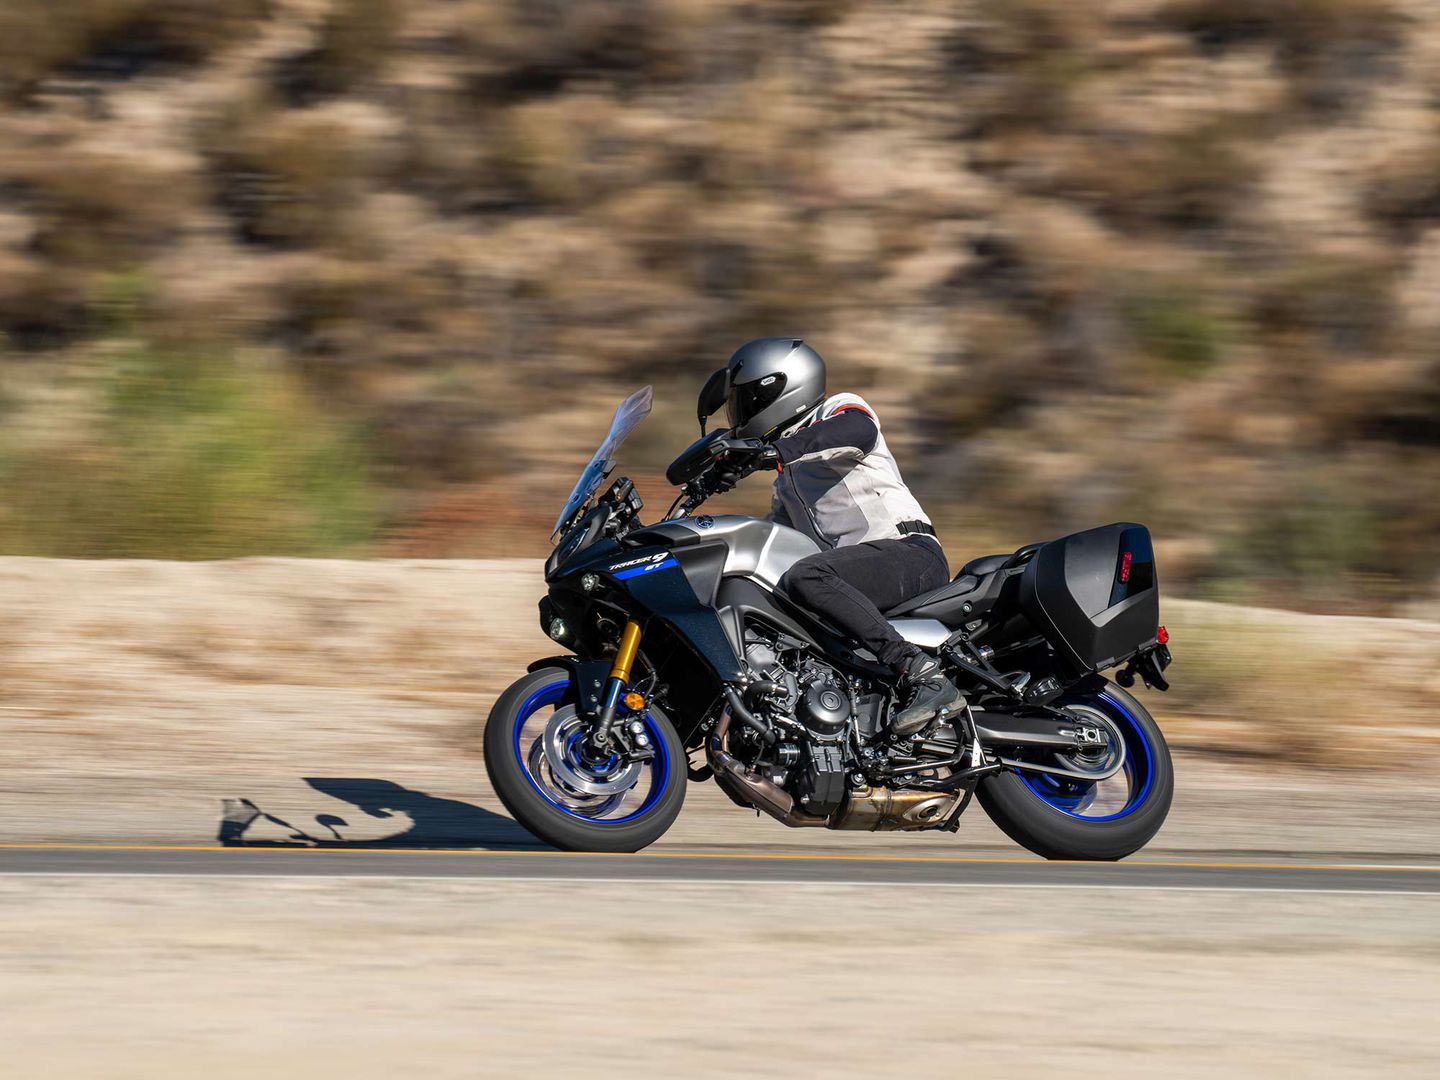 Senior Editor Adam Waheed puts the Yamaha Tracer 9 GT through its paces.